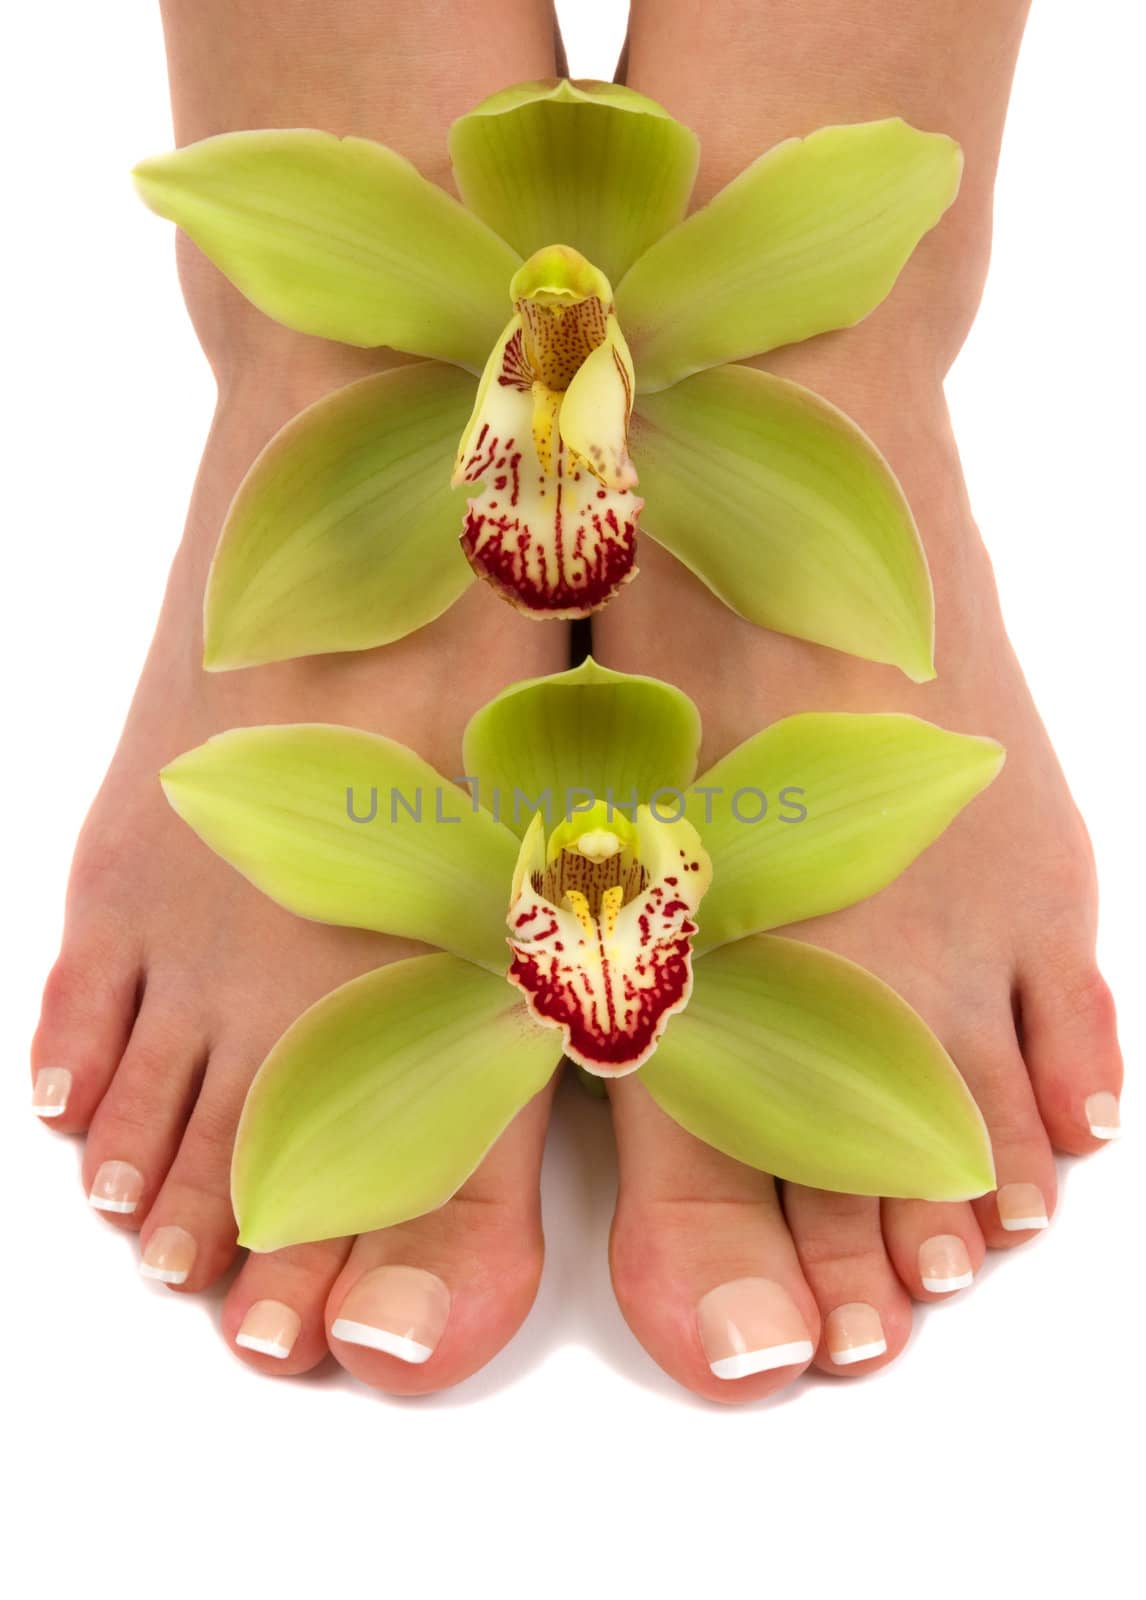 Feet and Orchids by BVDC